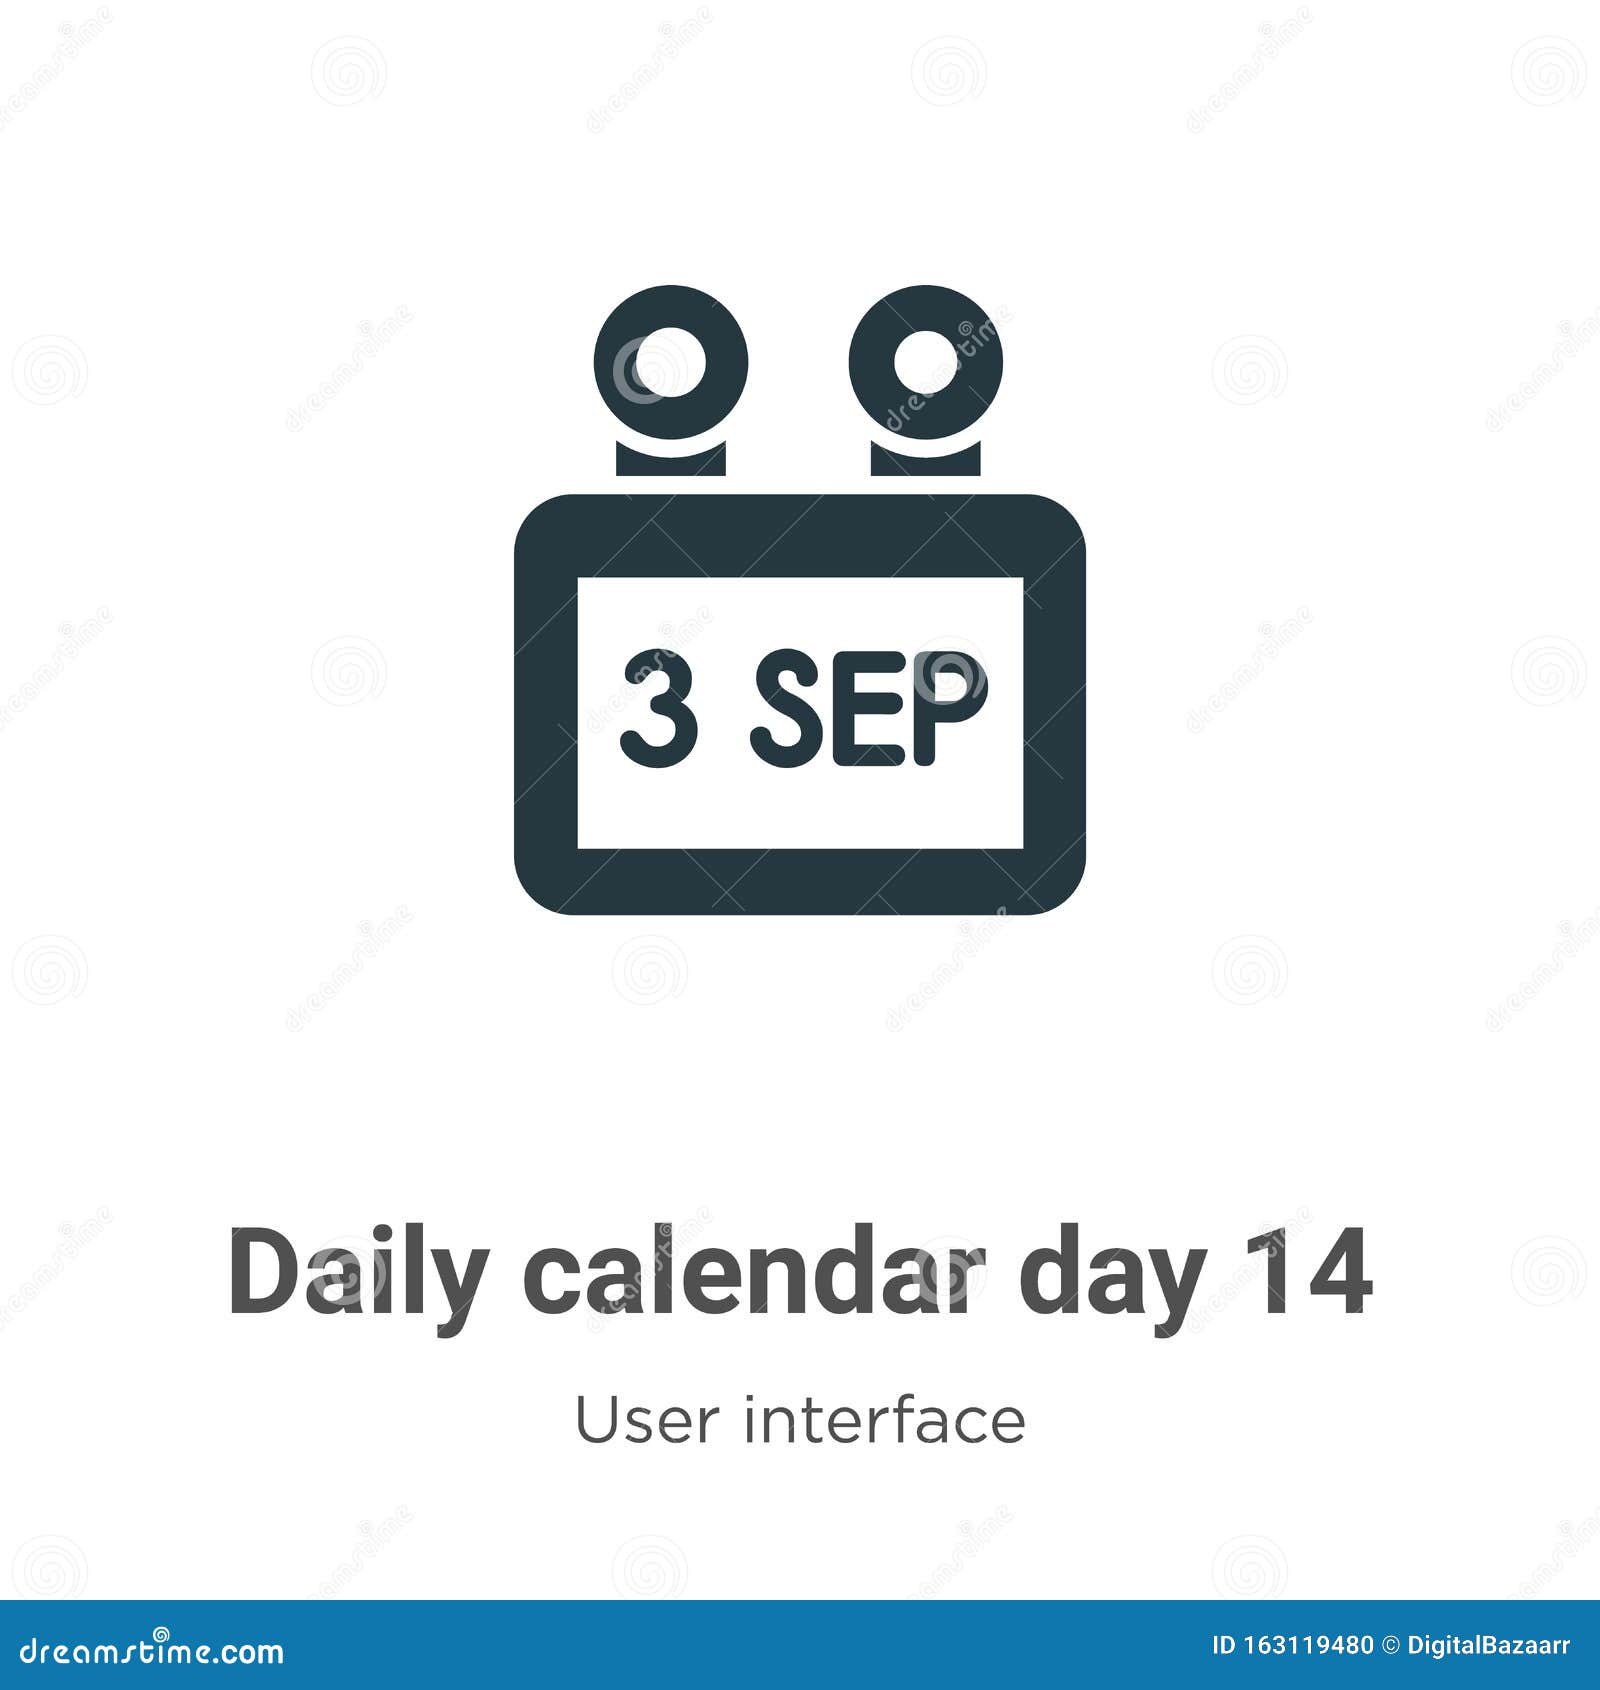 daily calendar day 14  icon on white background. flat  daily calendar day 14 icon  sign from modern user